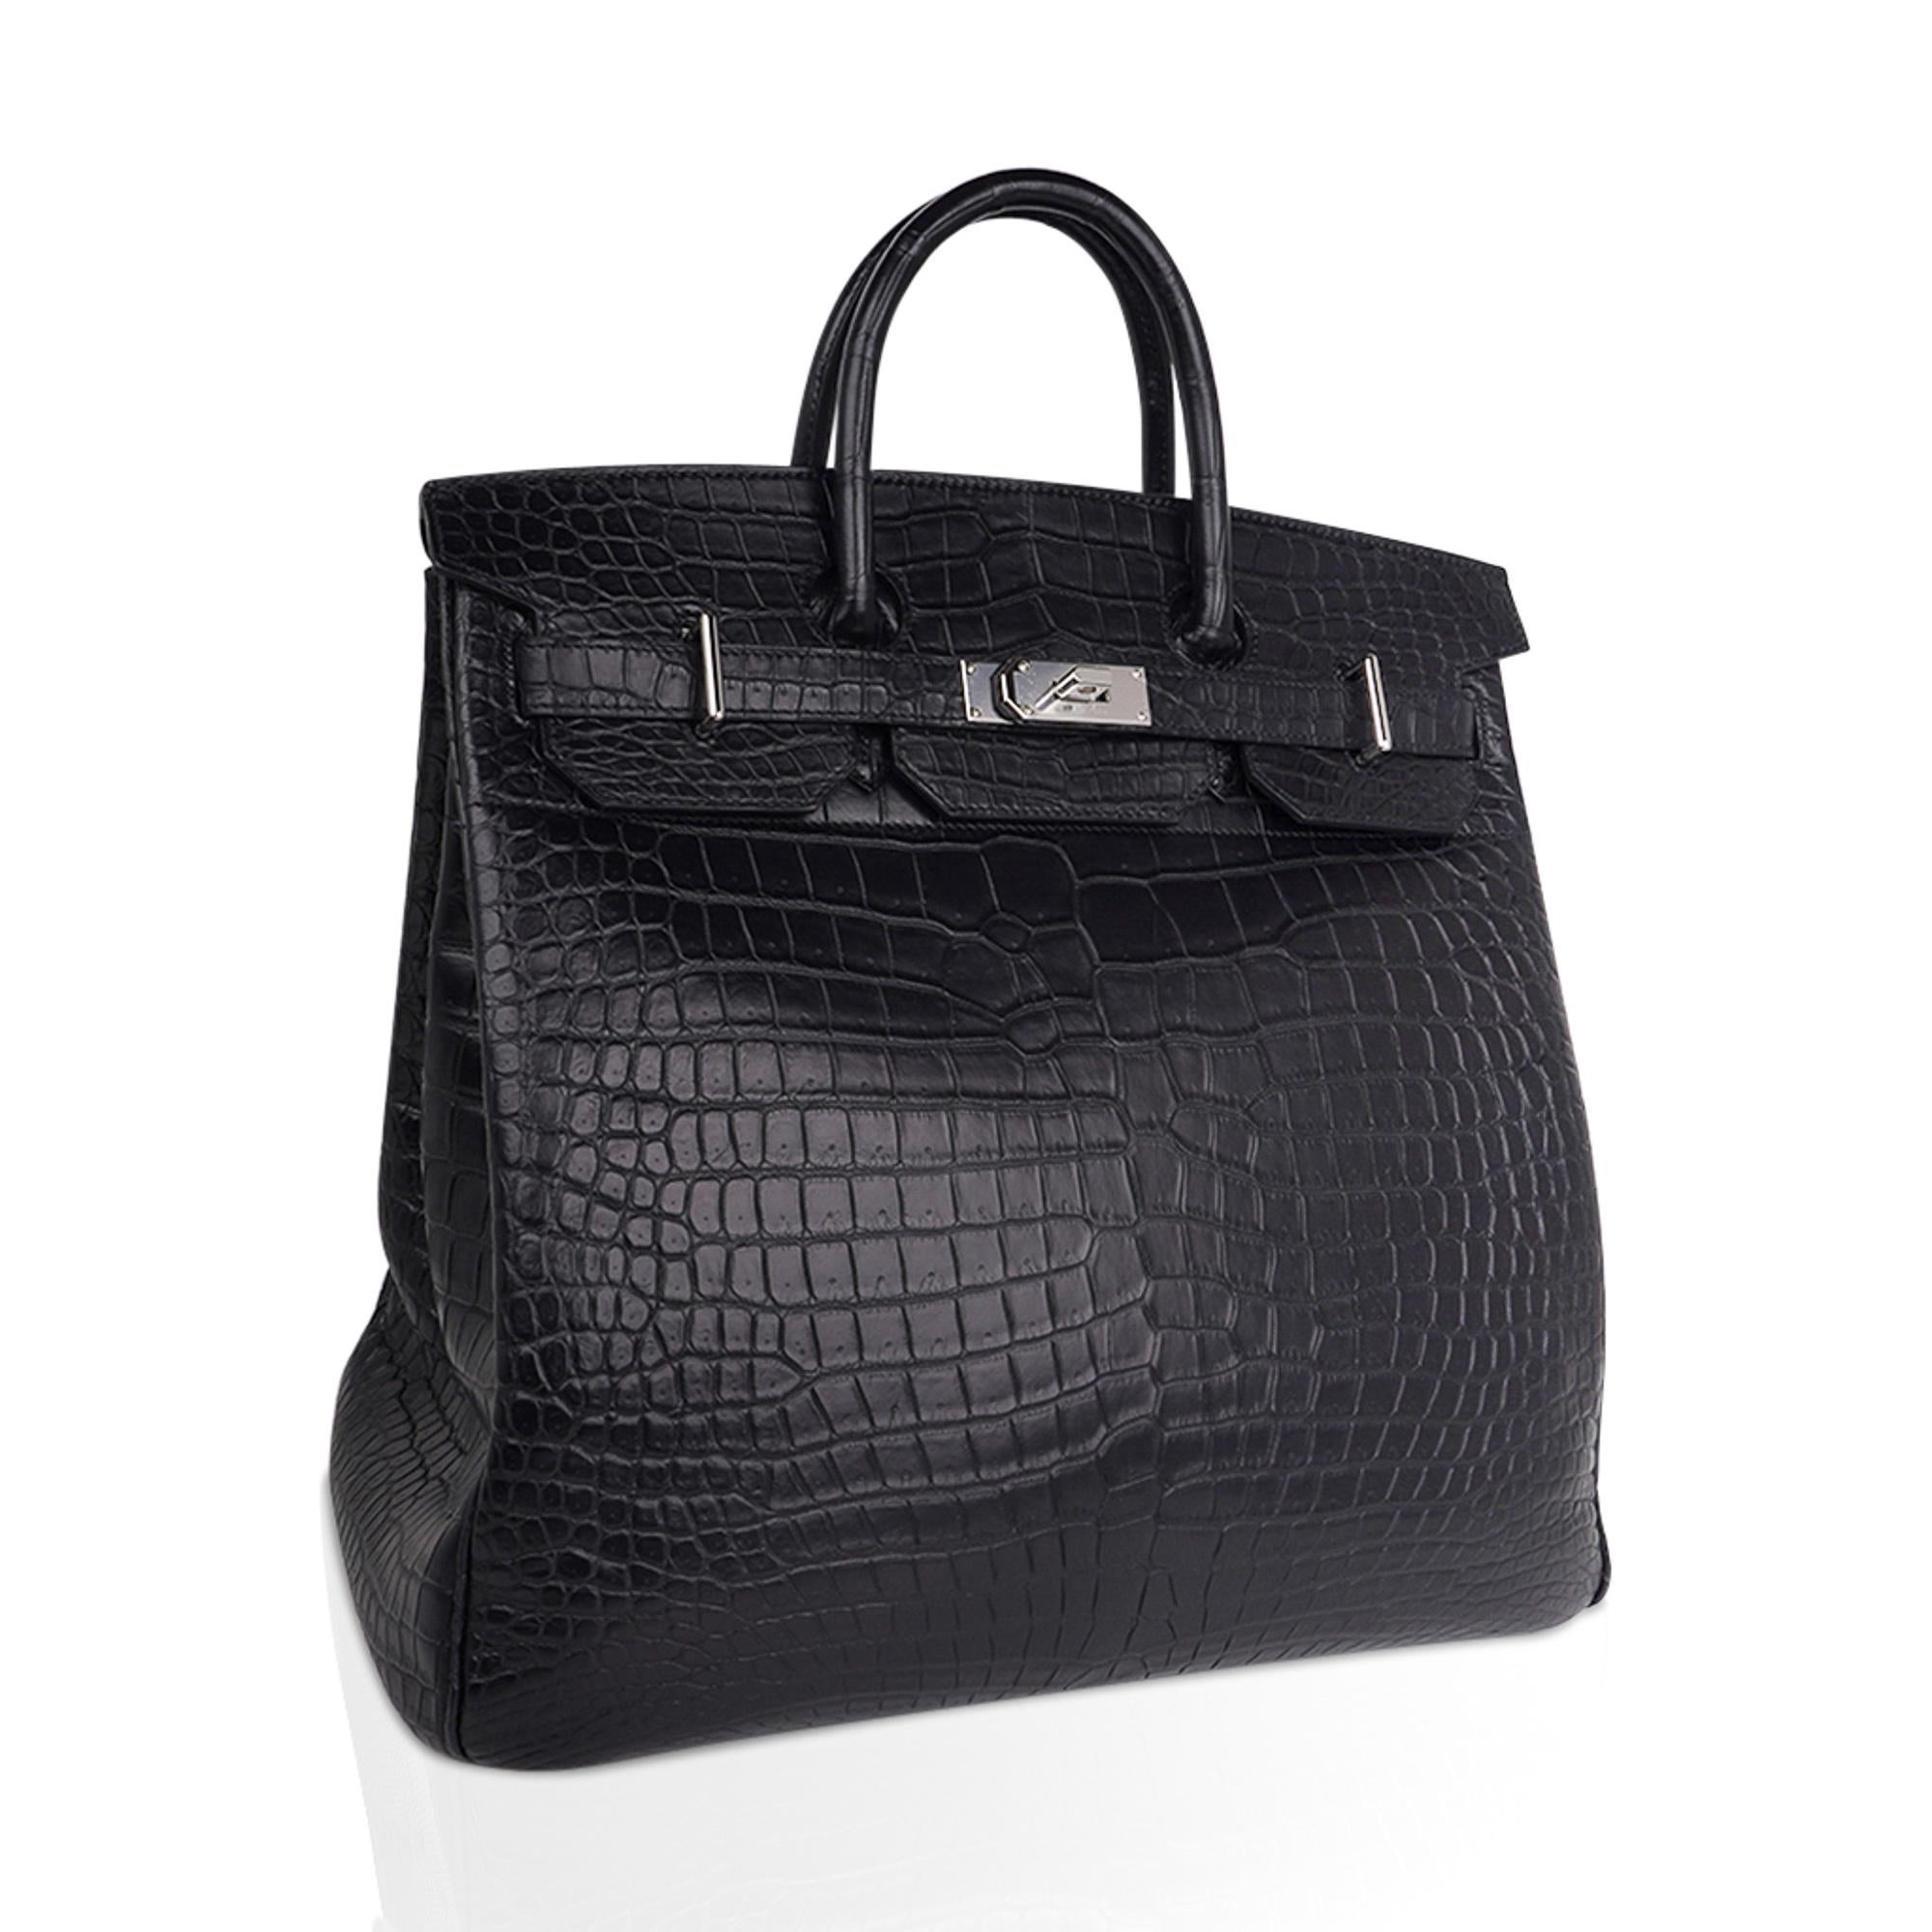 Mightychic offers an Hermes HAC 40 Birkin bag featured in Black matte Porosus Crocodile.
Rare and exquisite, this Hermes HAC is timeless.
Matte Porosus Crocodile is the most elite of Herms skins with a soft and supple feel to the hand.
Fresh and